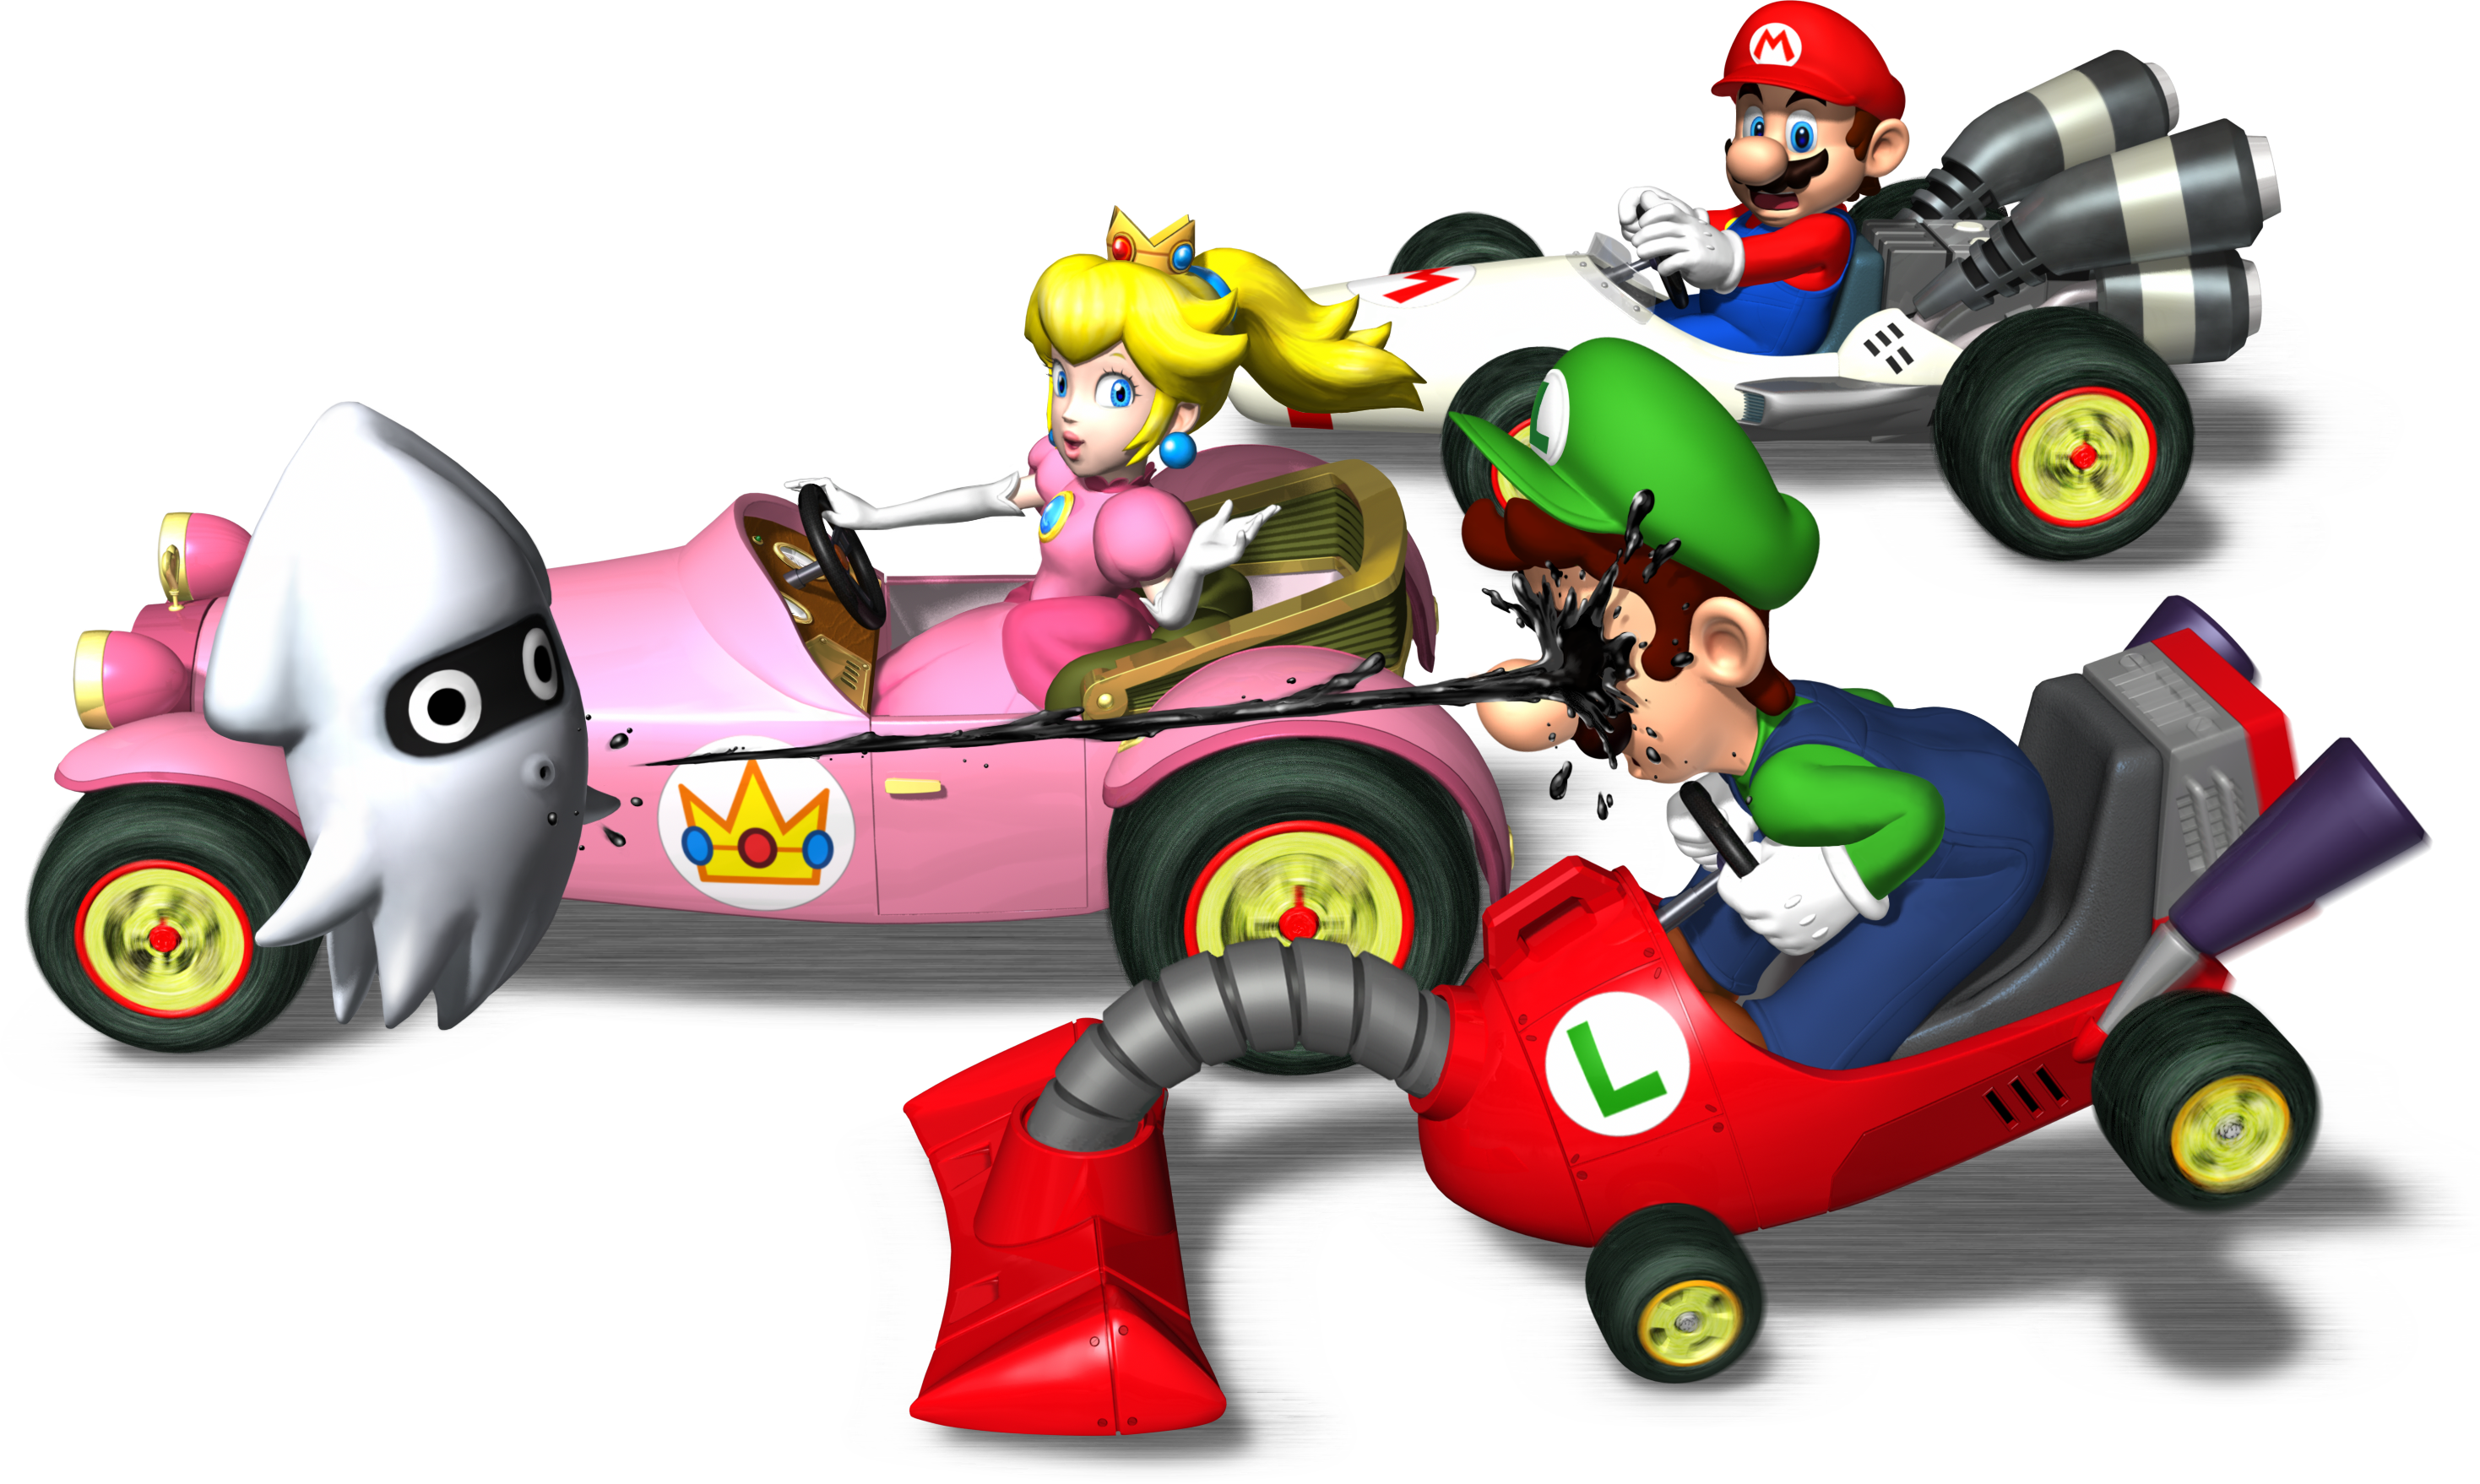 Download Some Say He's Still Getting Inked, To This Day Kart Ds Poltergust 4000 Size PNG Image